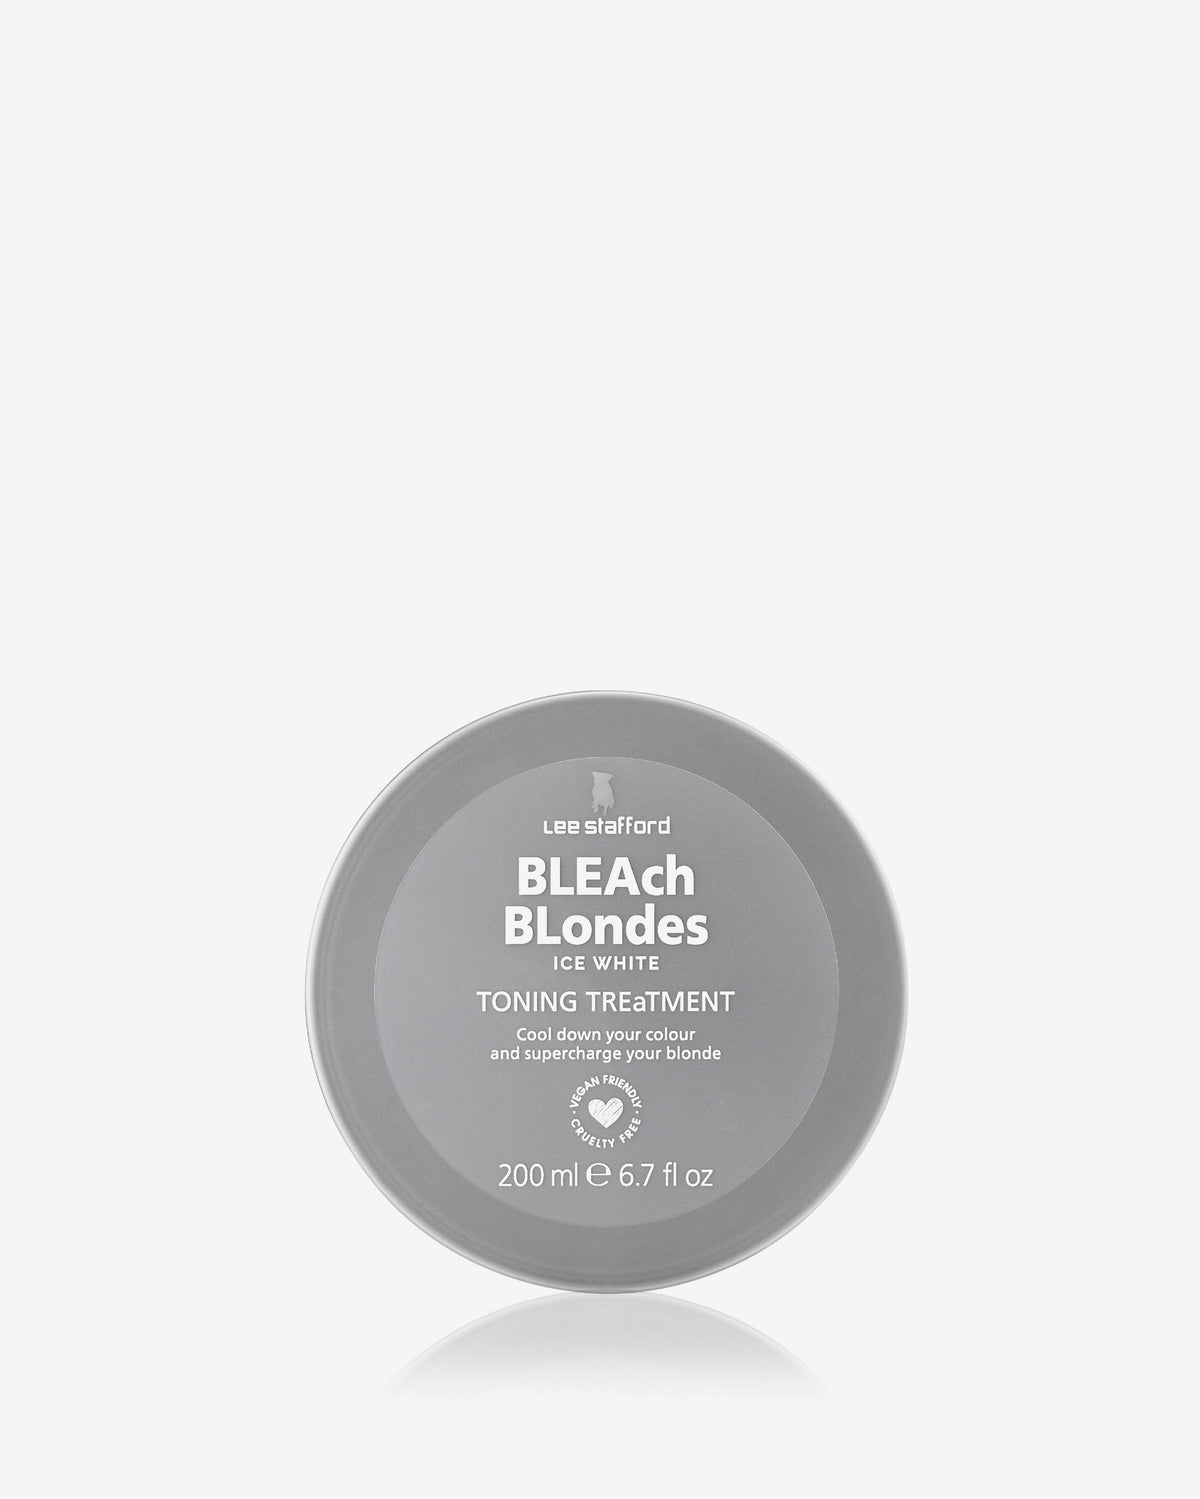 Bleach Blondes Ice White Toning Treatment Mask